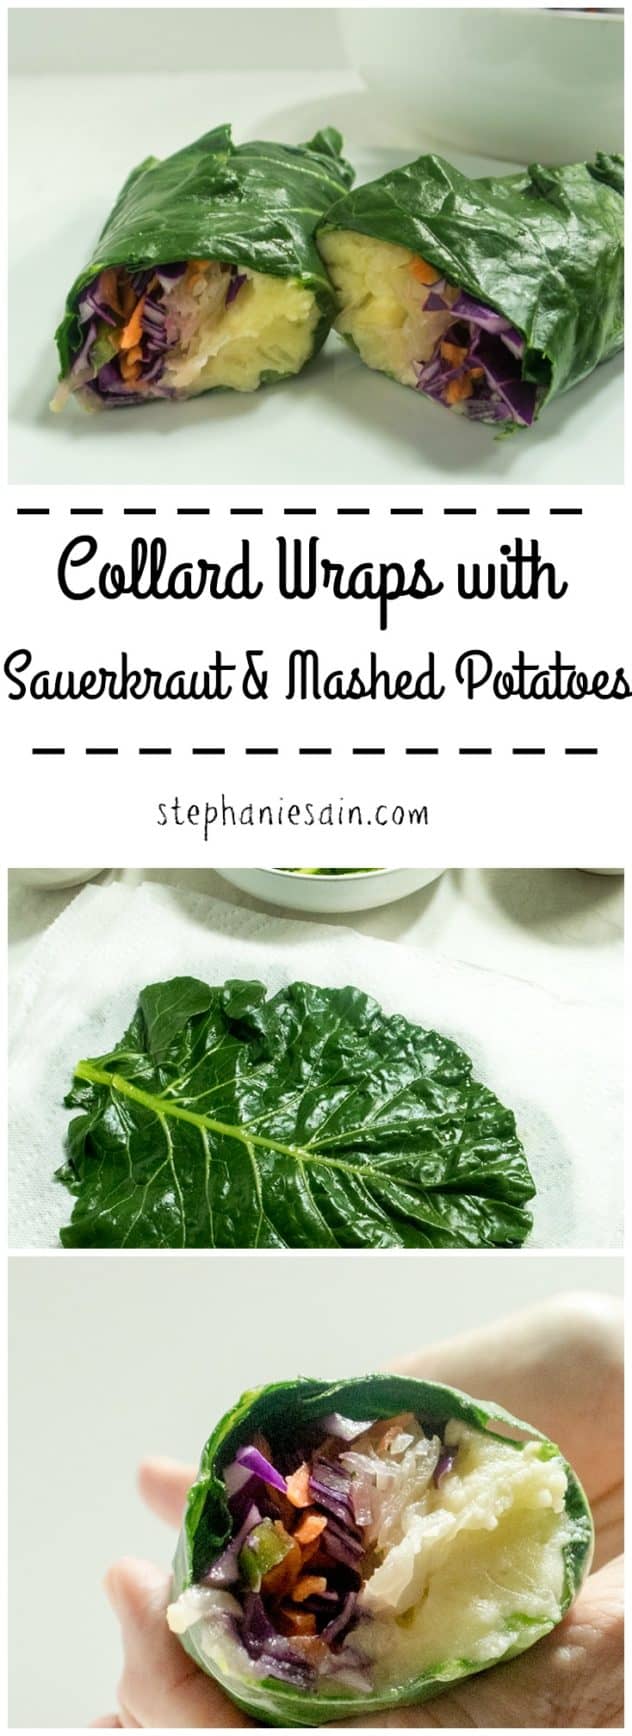 Collard Wraps with Sauerkraut & Mashed Potatoes are an easy, healthy, tasty meal that can be customized with any of your favorite fillings. Vegetarian, Gluten Free, & Vegan option.